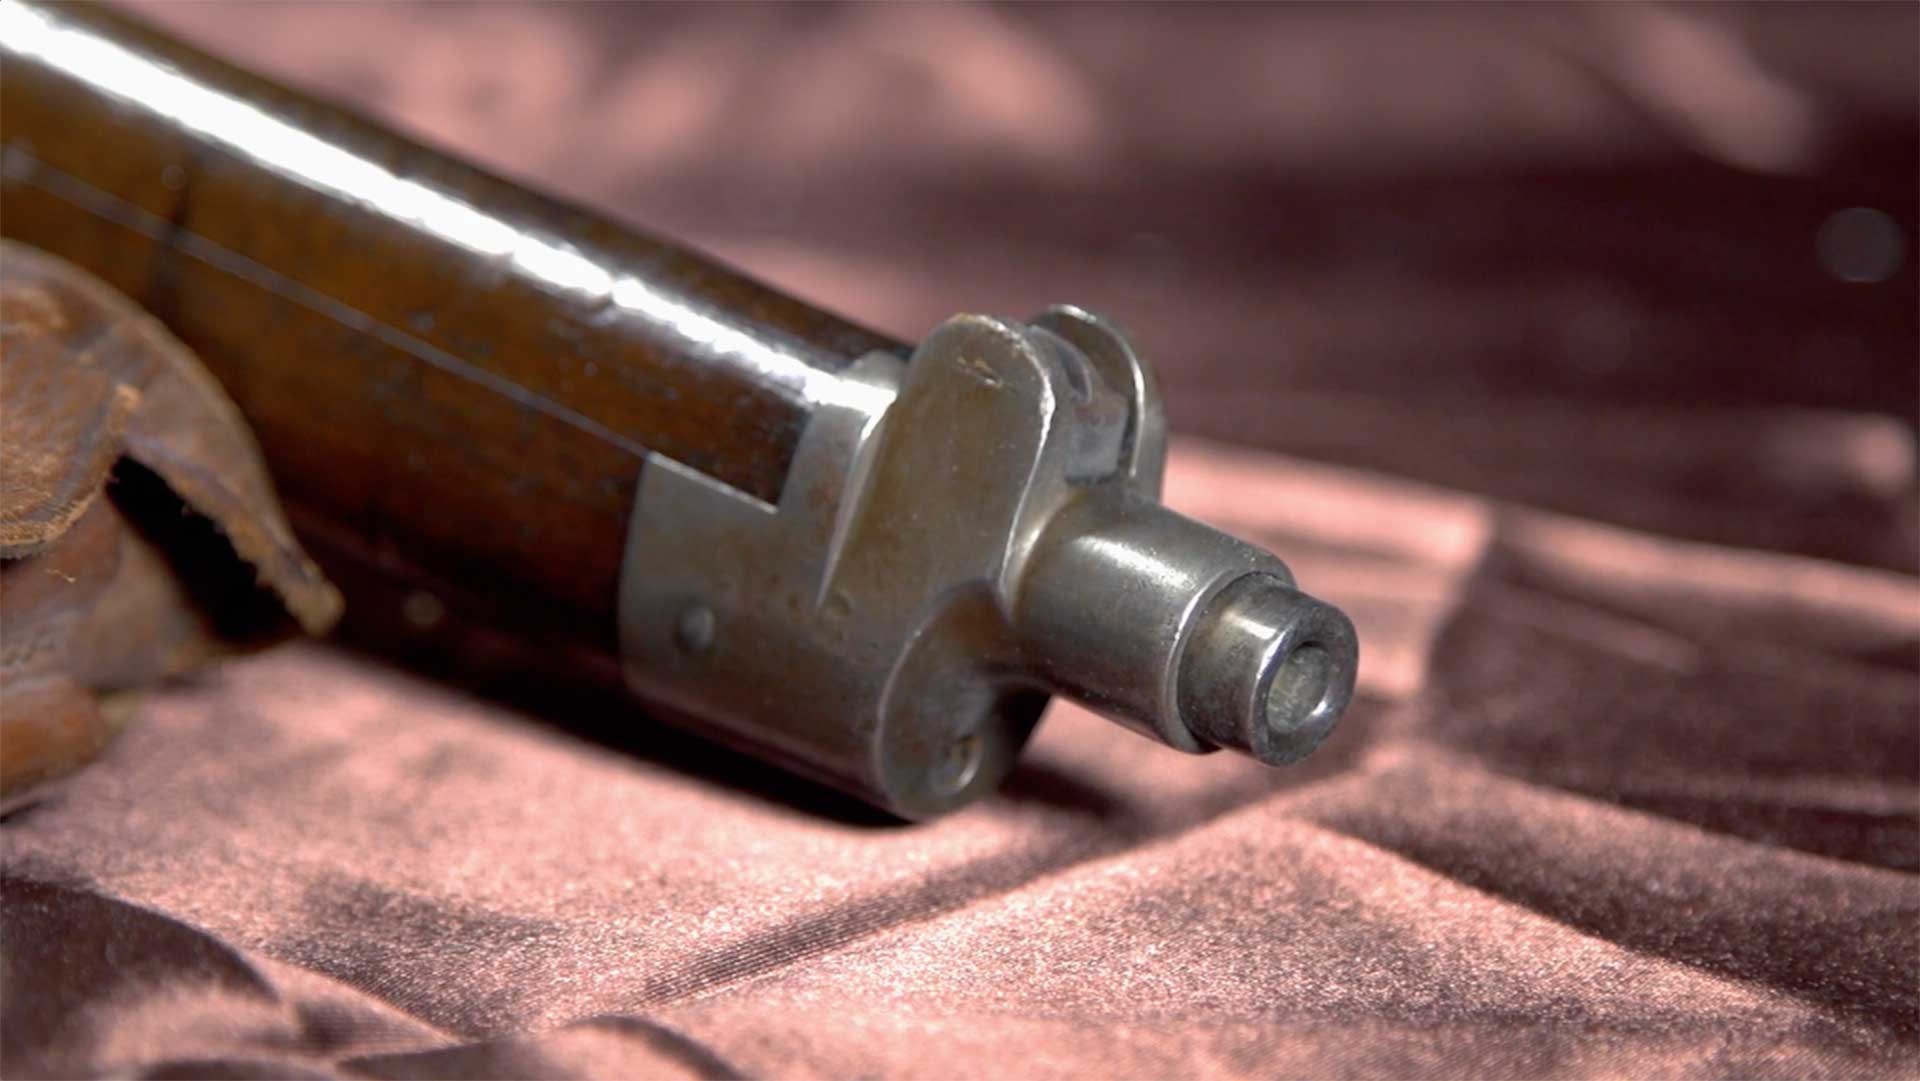 Nose cap of the Lee-Enfield carbine.